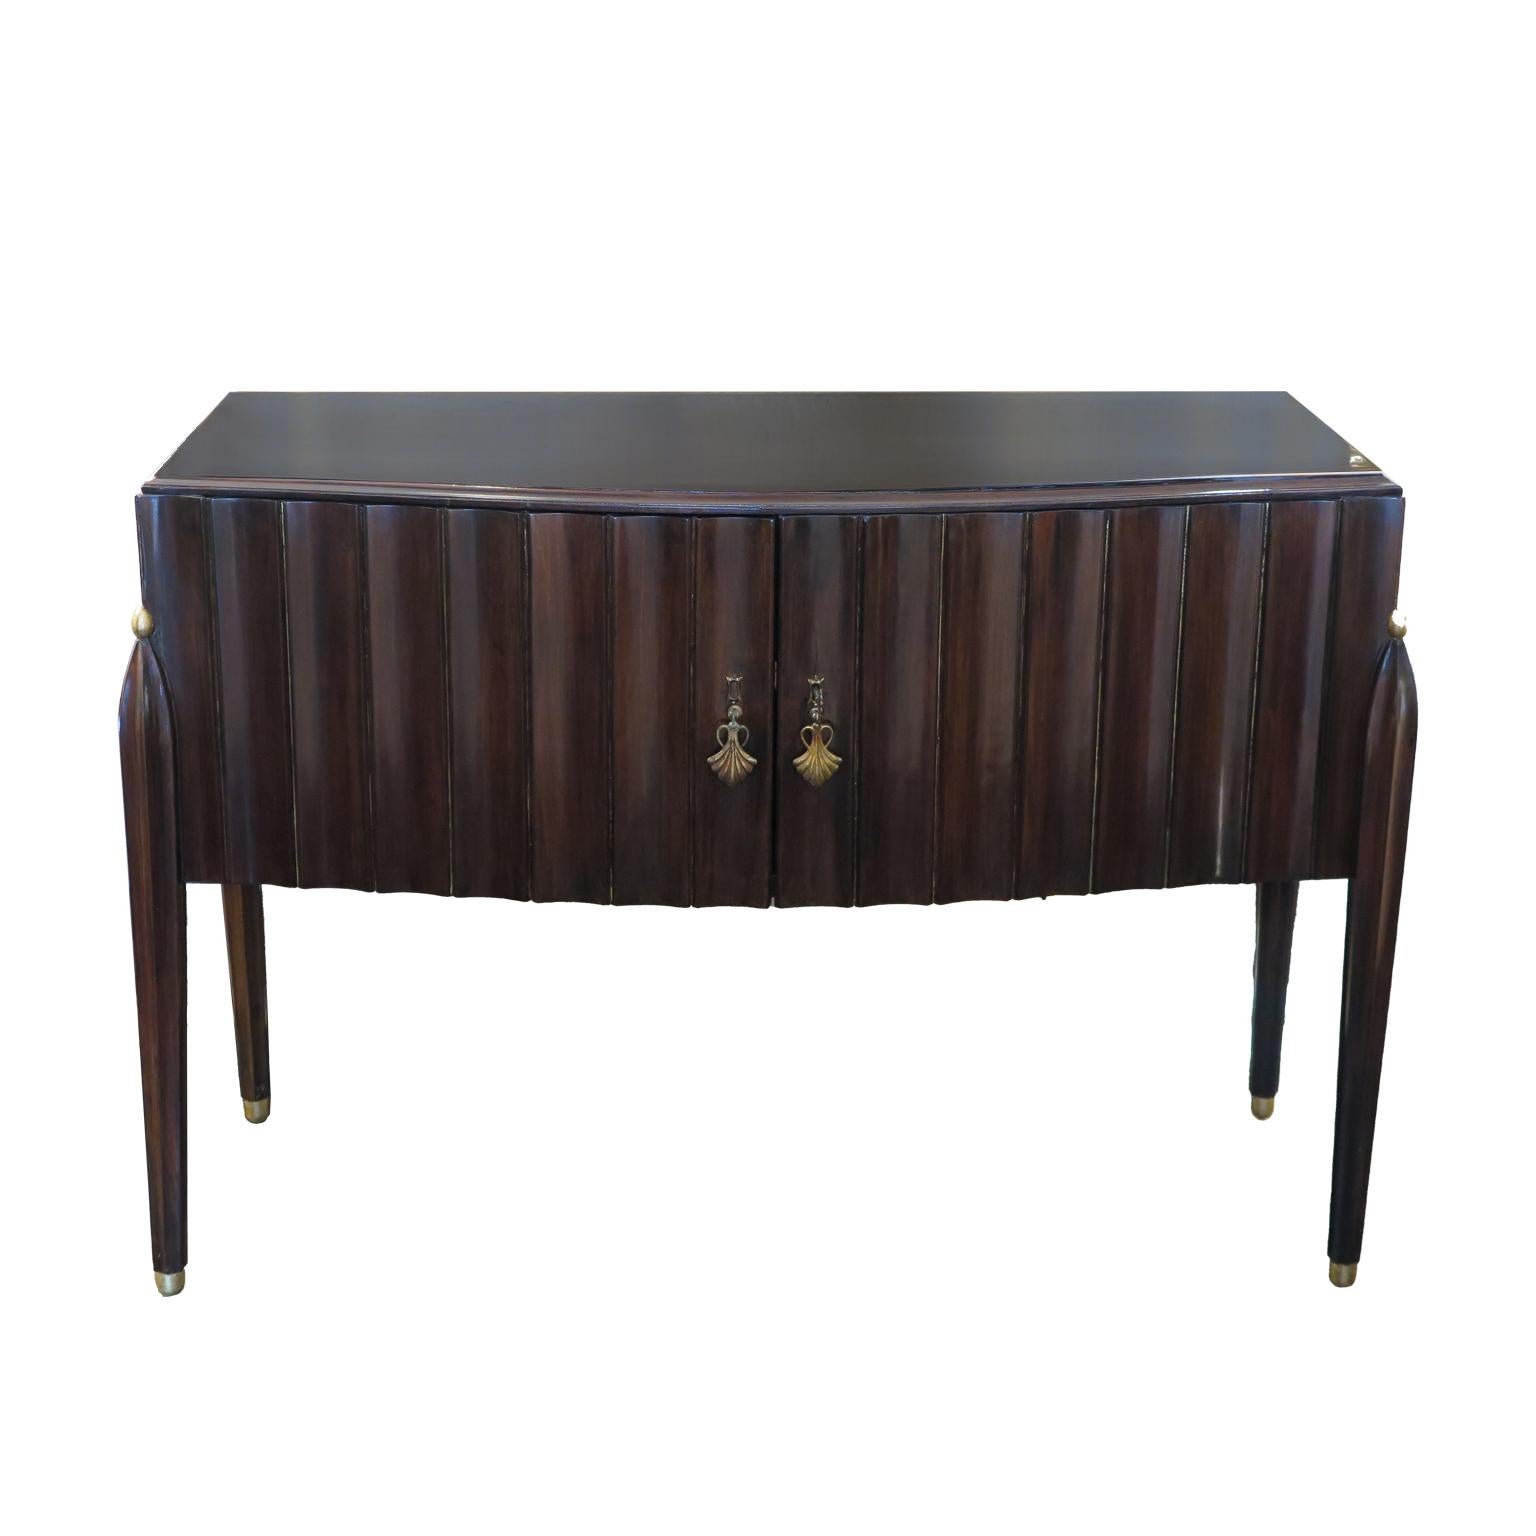 Early mid-century console with an espresso stained mahogany with beautiful fluted detailing along facade and sides. Four ribbed tapered legs support the delicate frame. The original brass hardware adds the finishing touch.